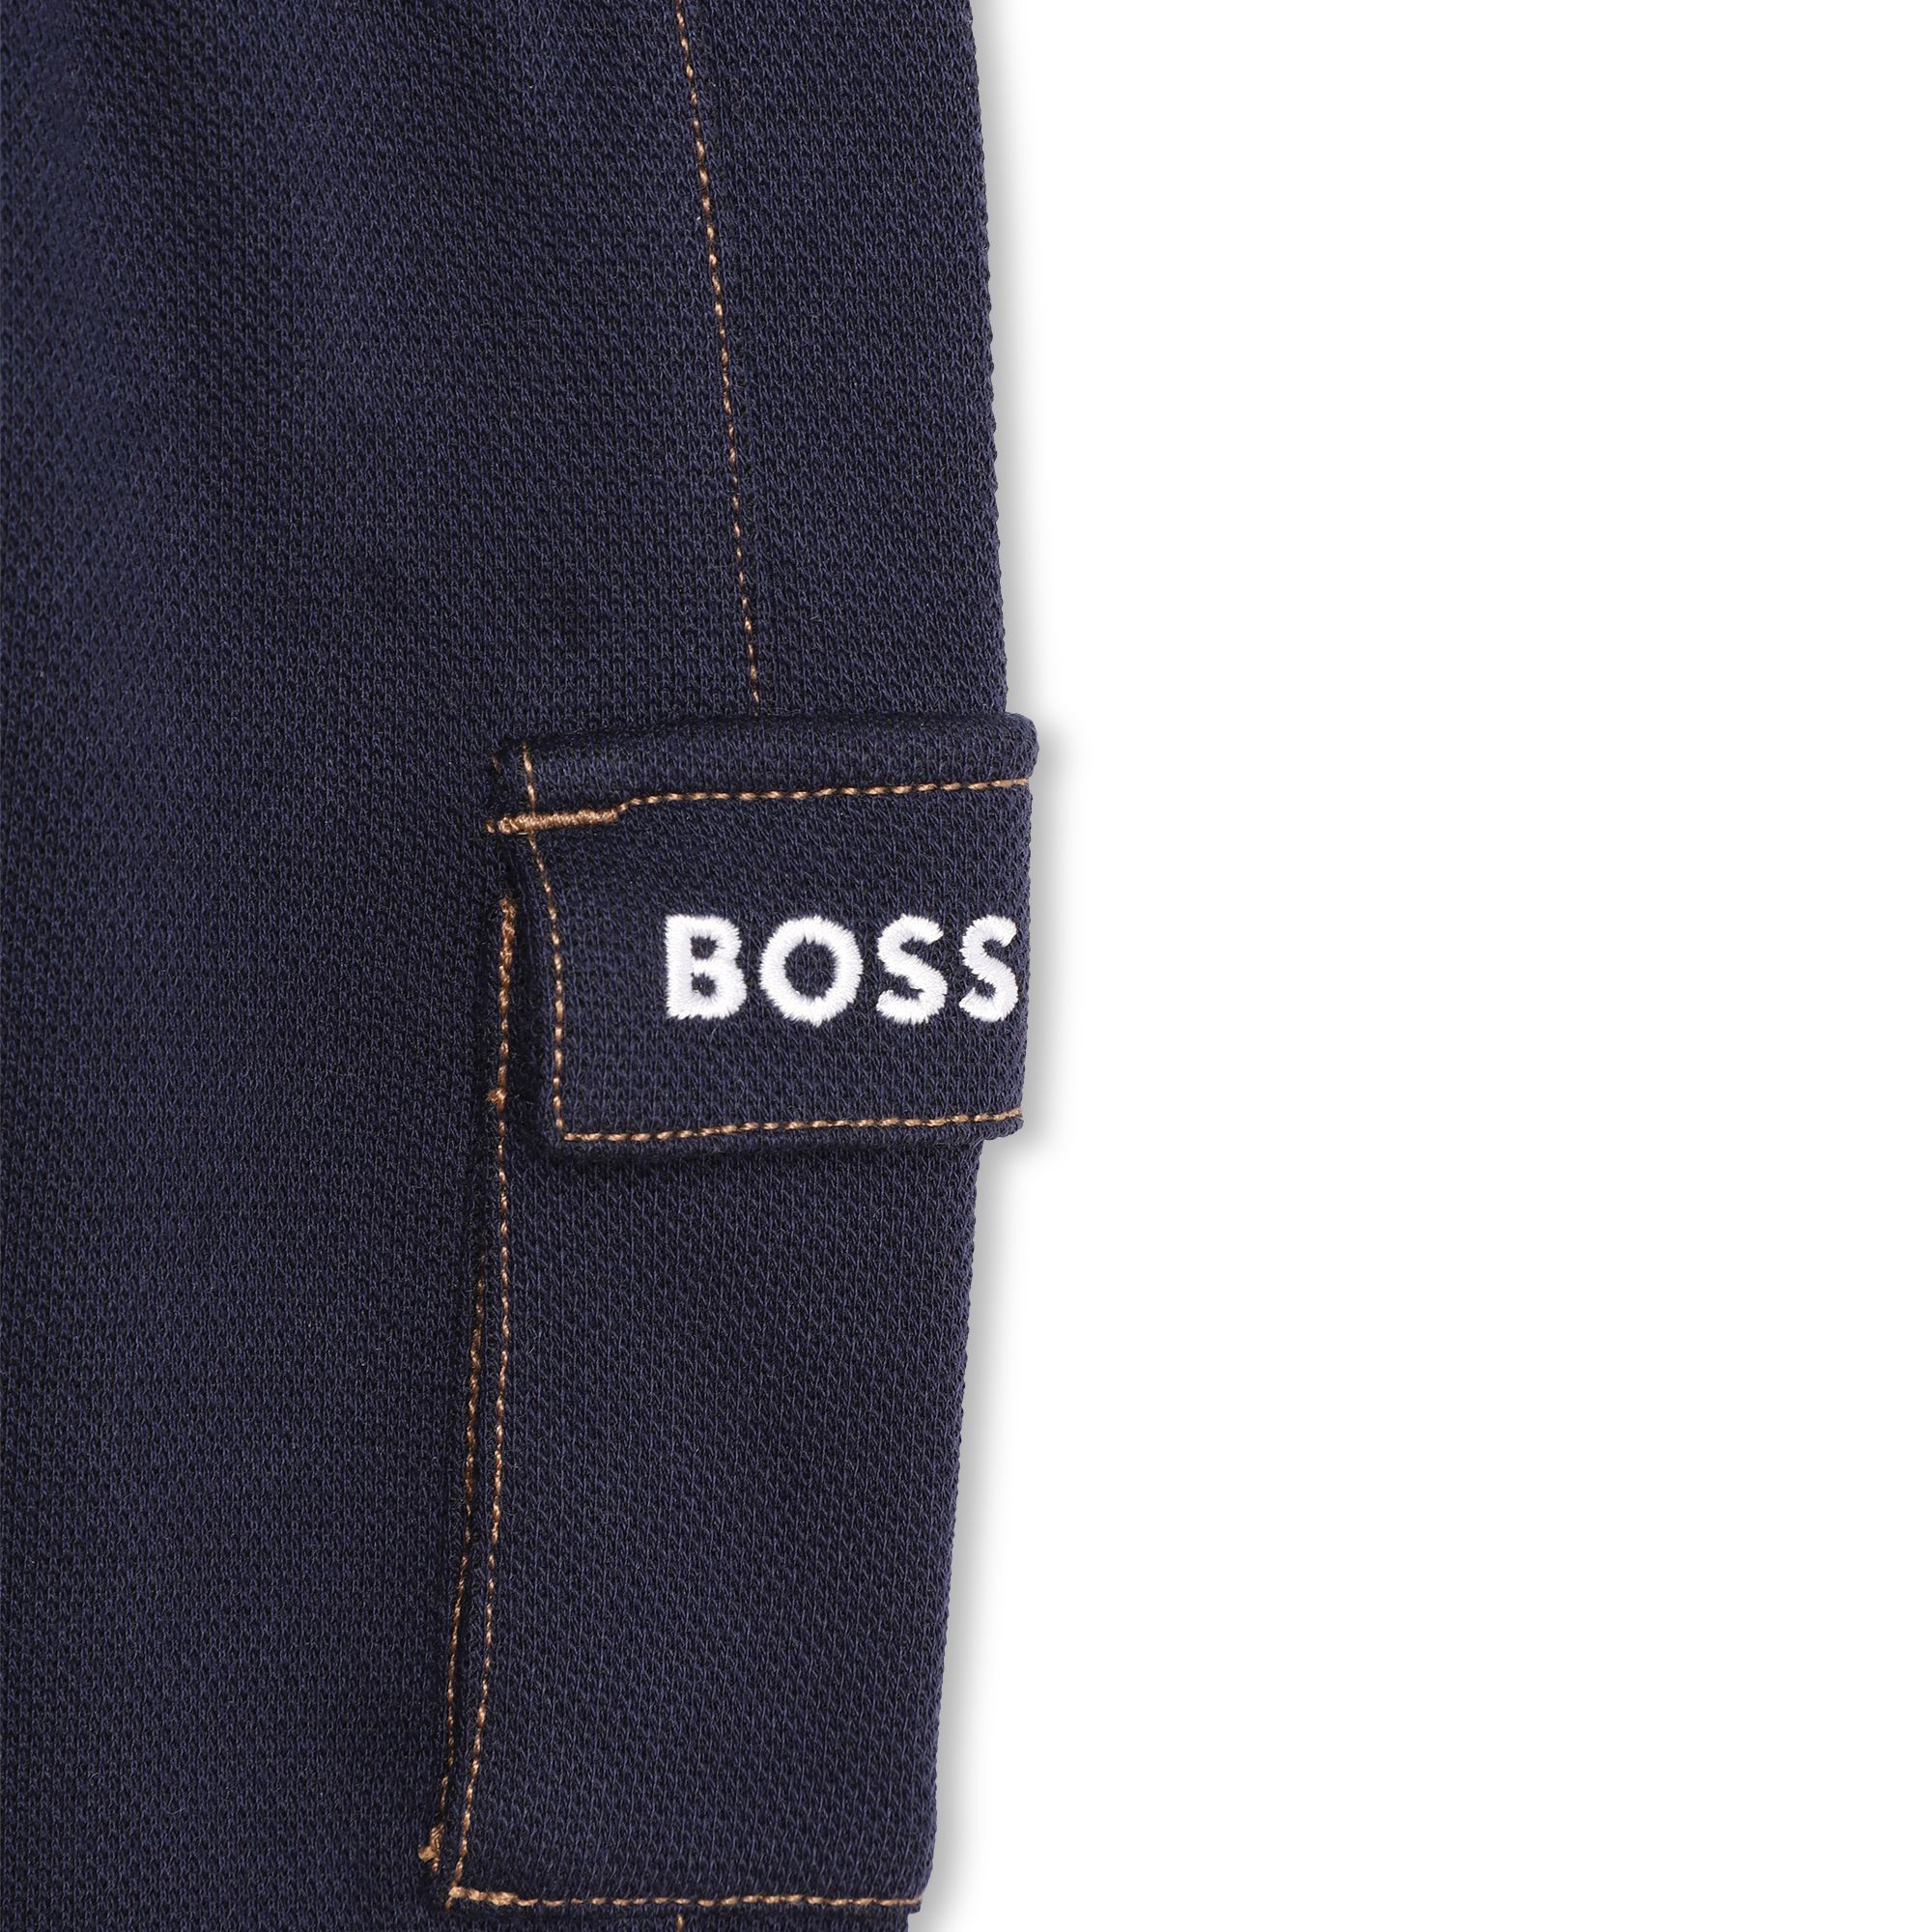 Embroidered pocket trousers BOSS for BOY